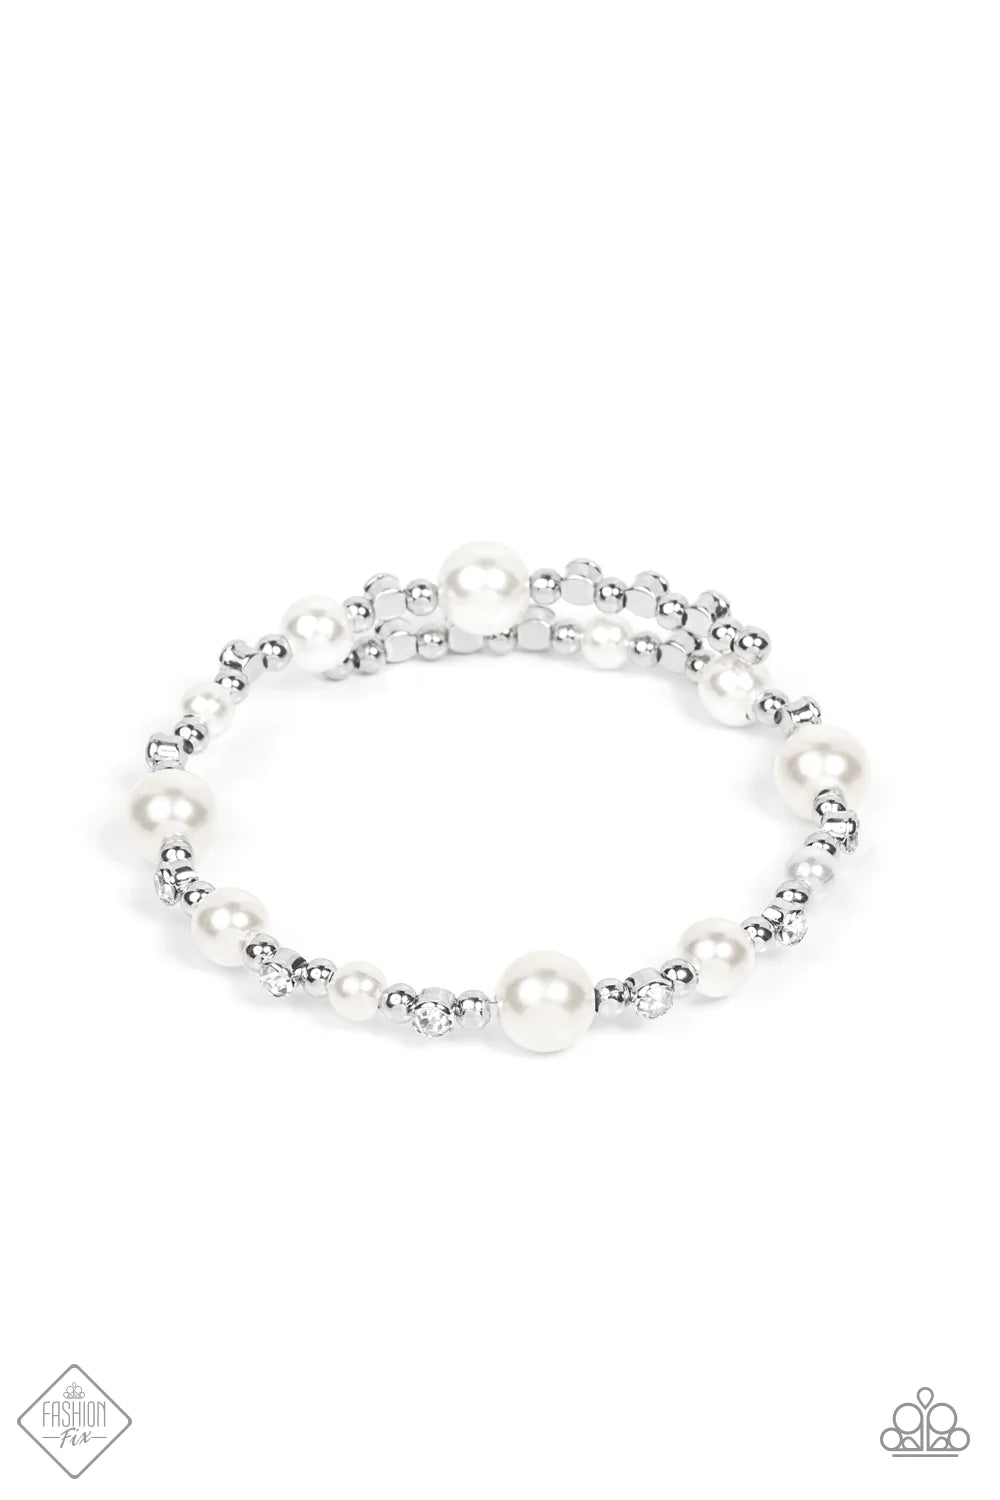 Chicly Celebrity - White (Pearl) Bracelet (FFA-1021)